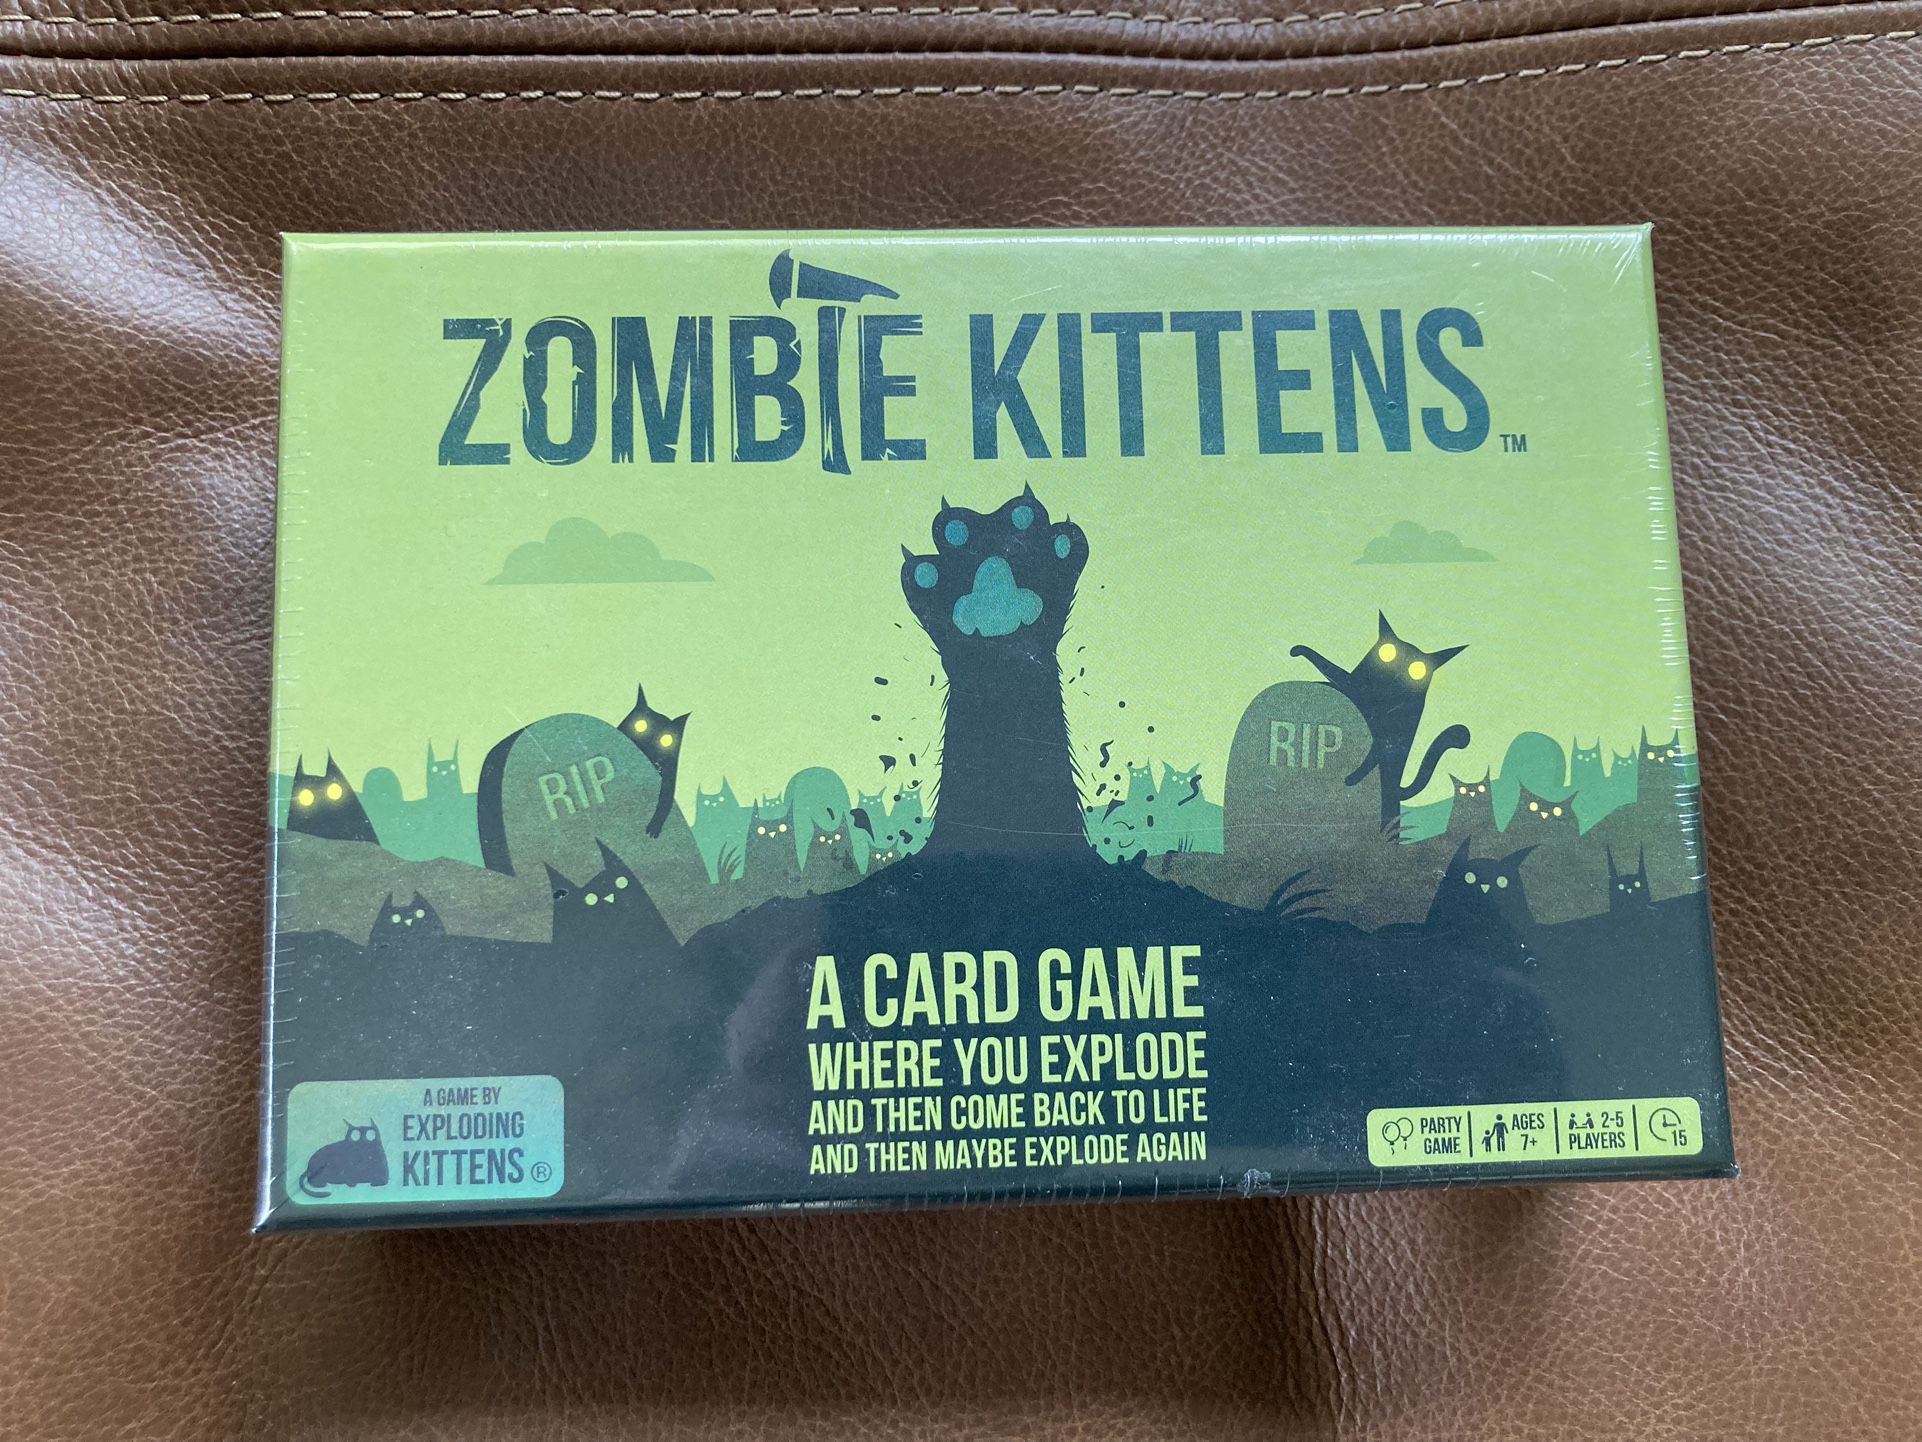 Zombie kittens Card Game